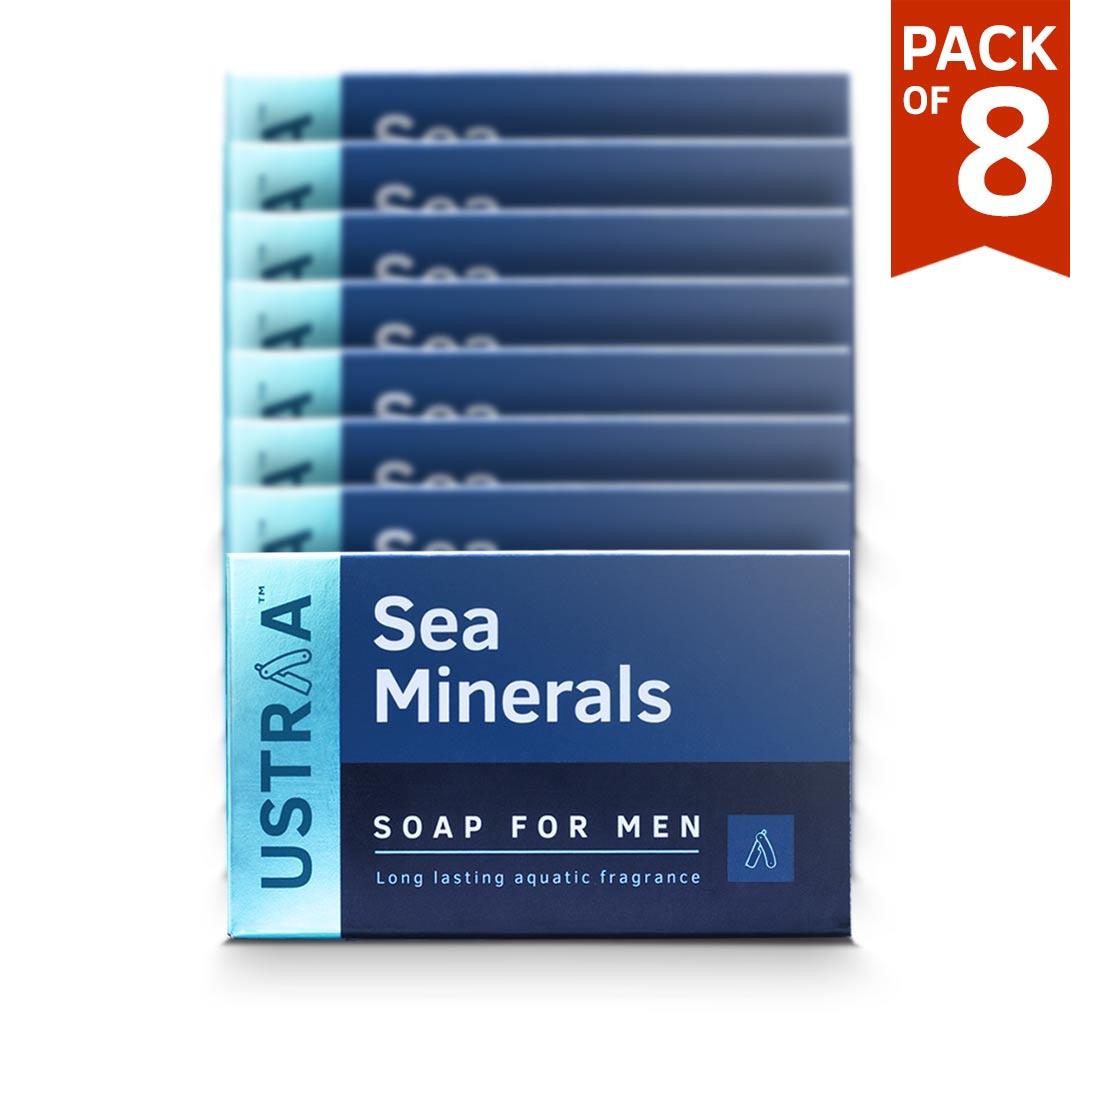 Ustraa Deo Soap For Men with Sea Minerals, 100 g (Pack of 8)